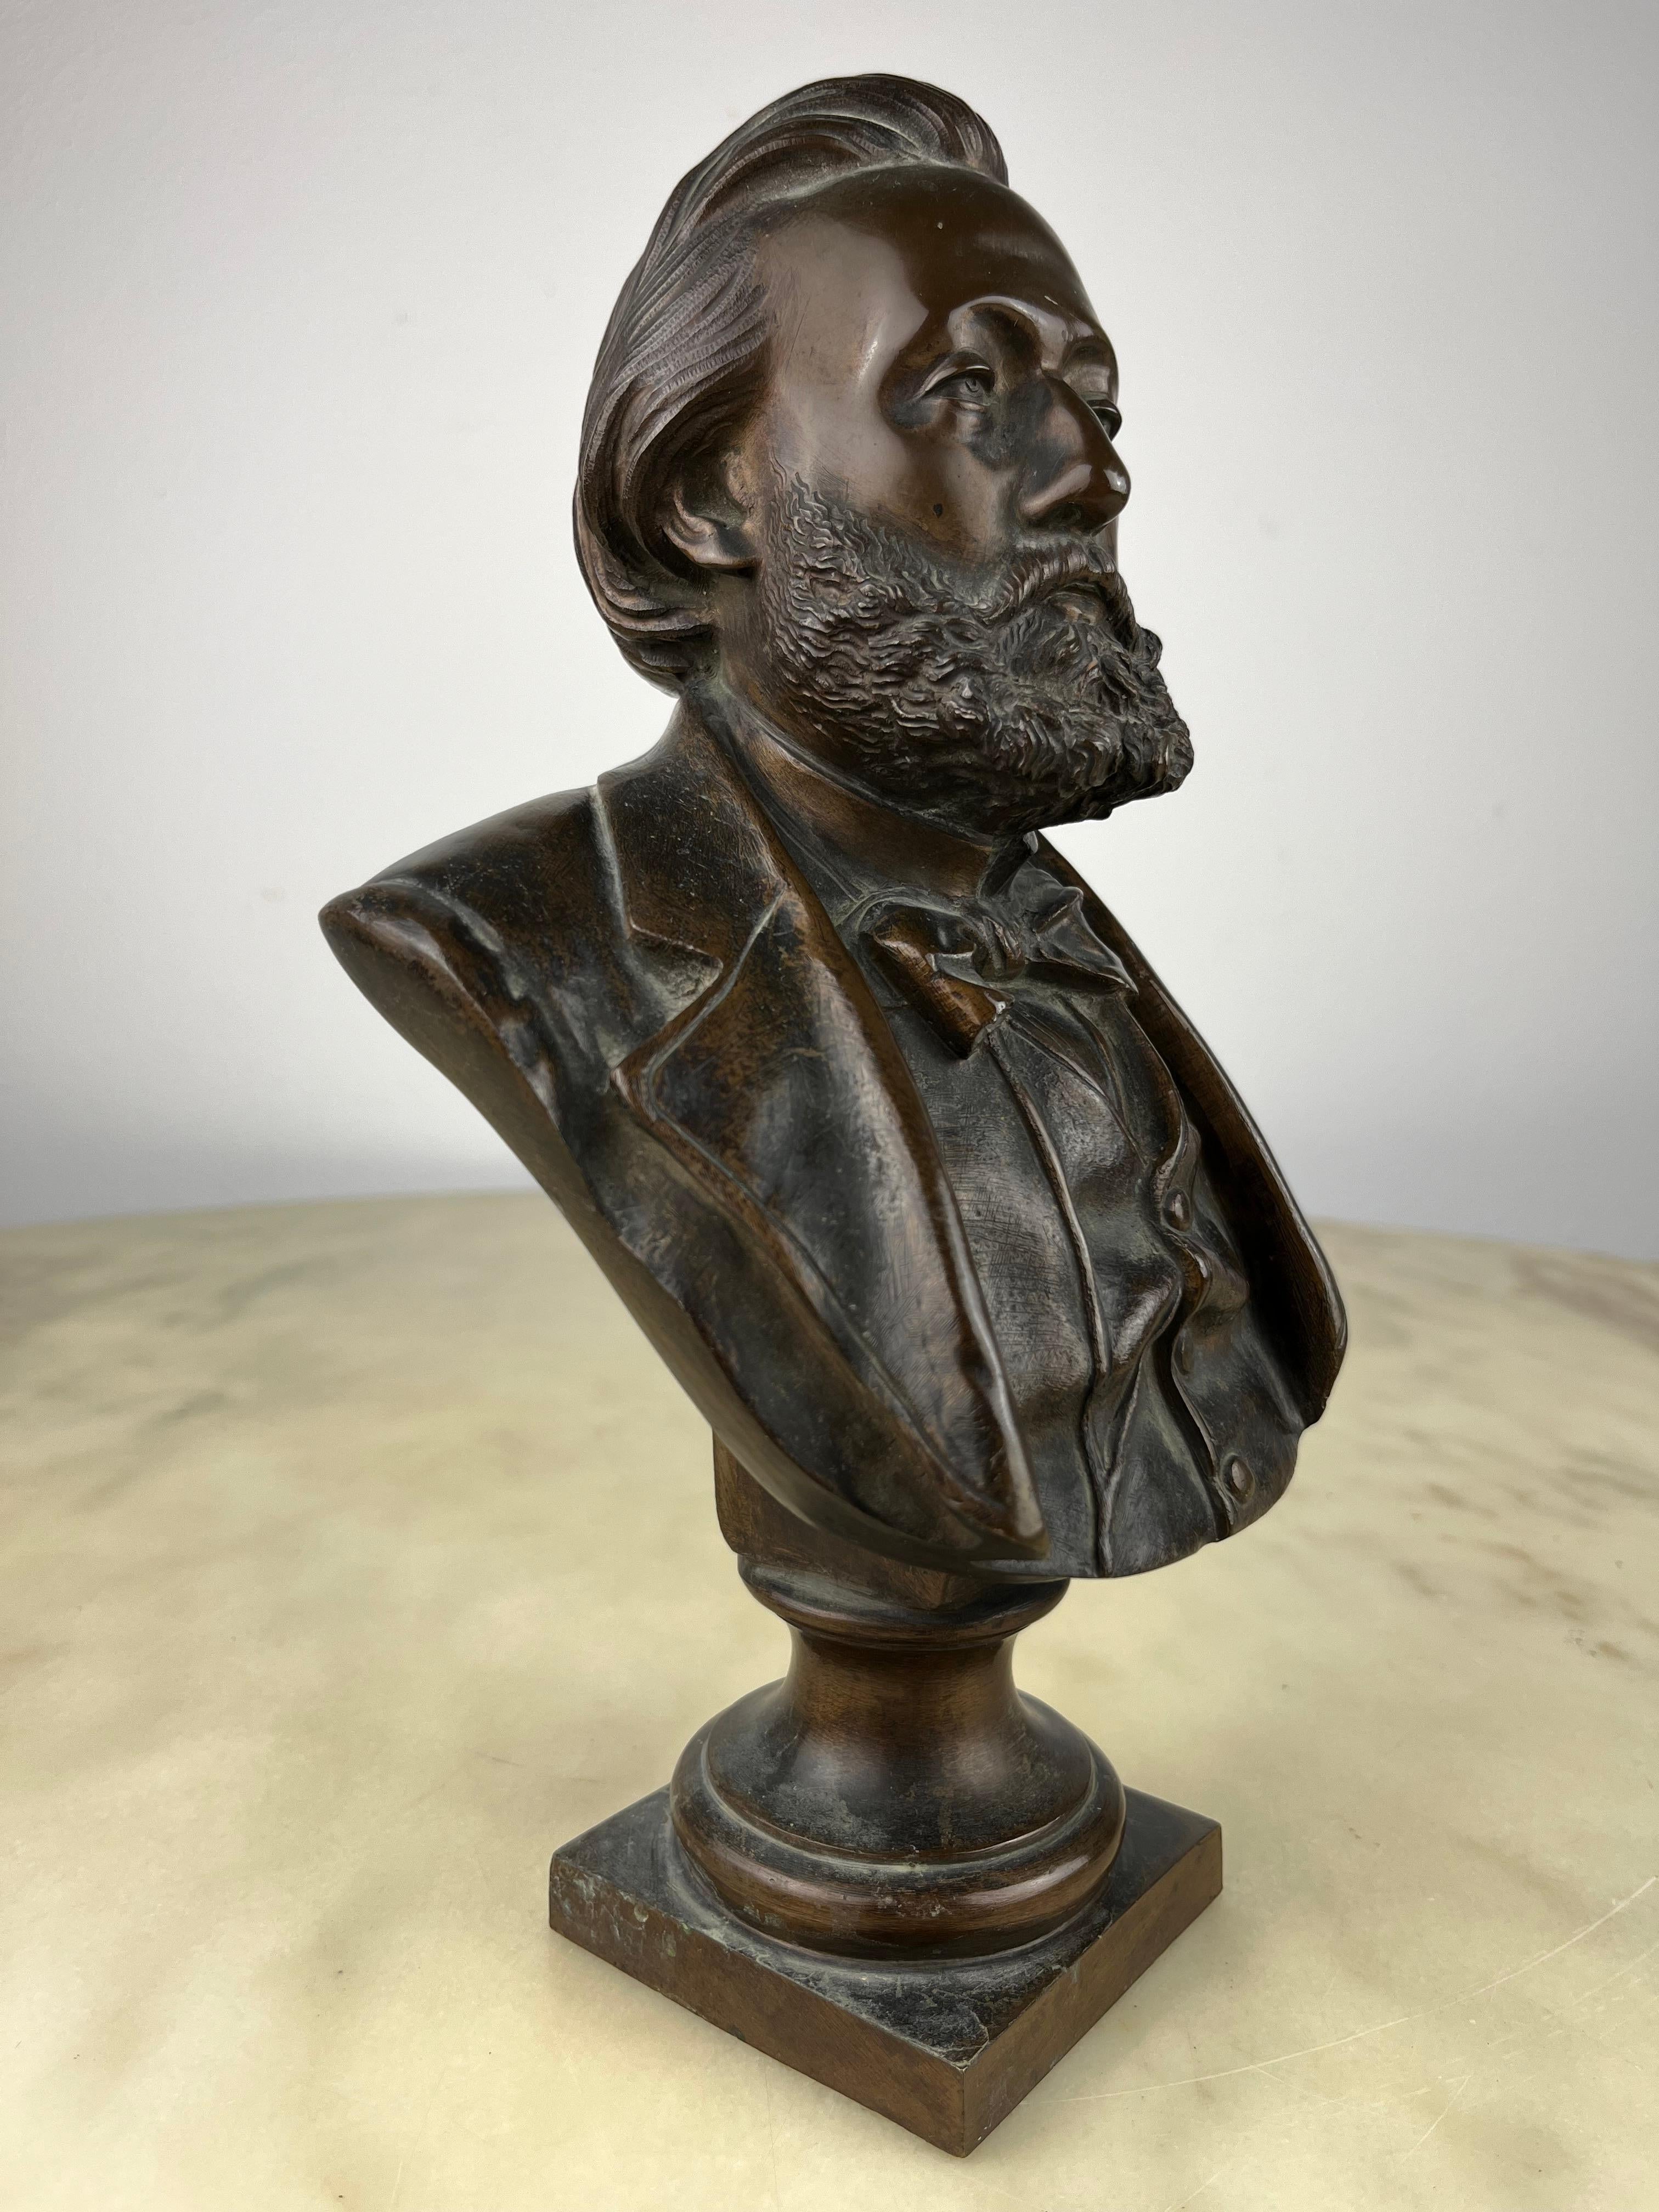 Jean Bulio, bronze statue of Léon Gambetta, Prime Minister, France, 1930.
Work signed on the back by the artist.
Small signs of the time.

We guarantee adequate packaging and will ship via DHL, insuring the contents against any breakage or loss of